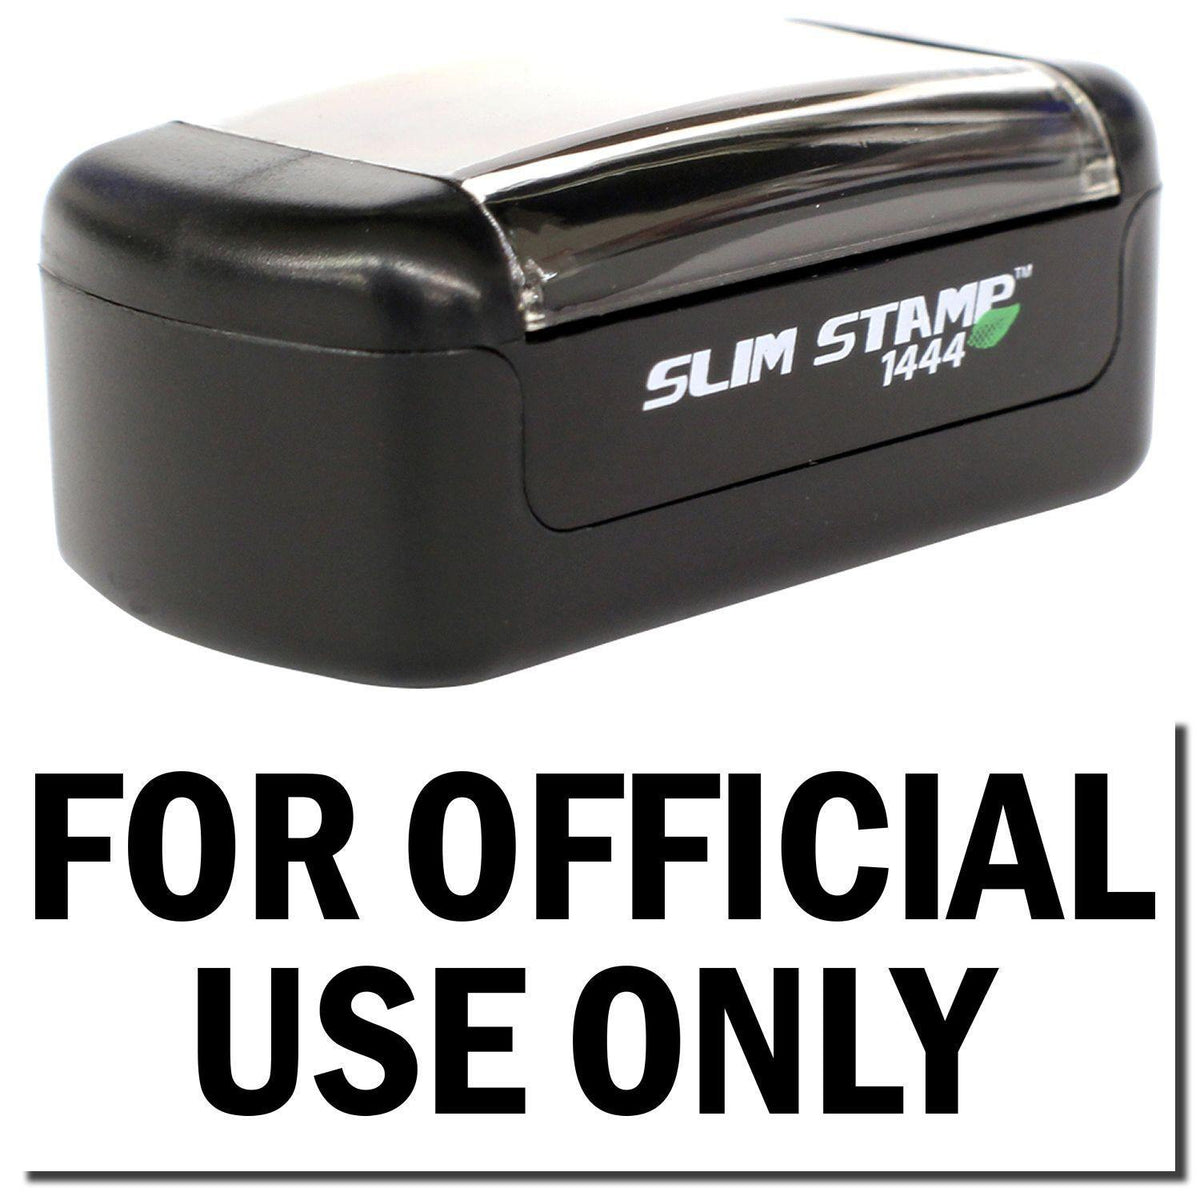 A stock office pre-inked stamp with a stamped image showing how the text &quot;FOR OFFICIAL USE ONLY&quot; is displayed after stamping.